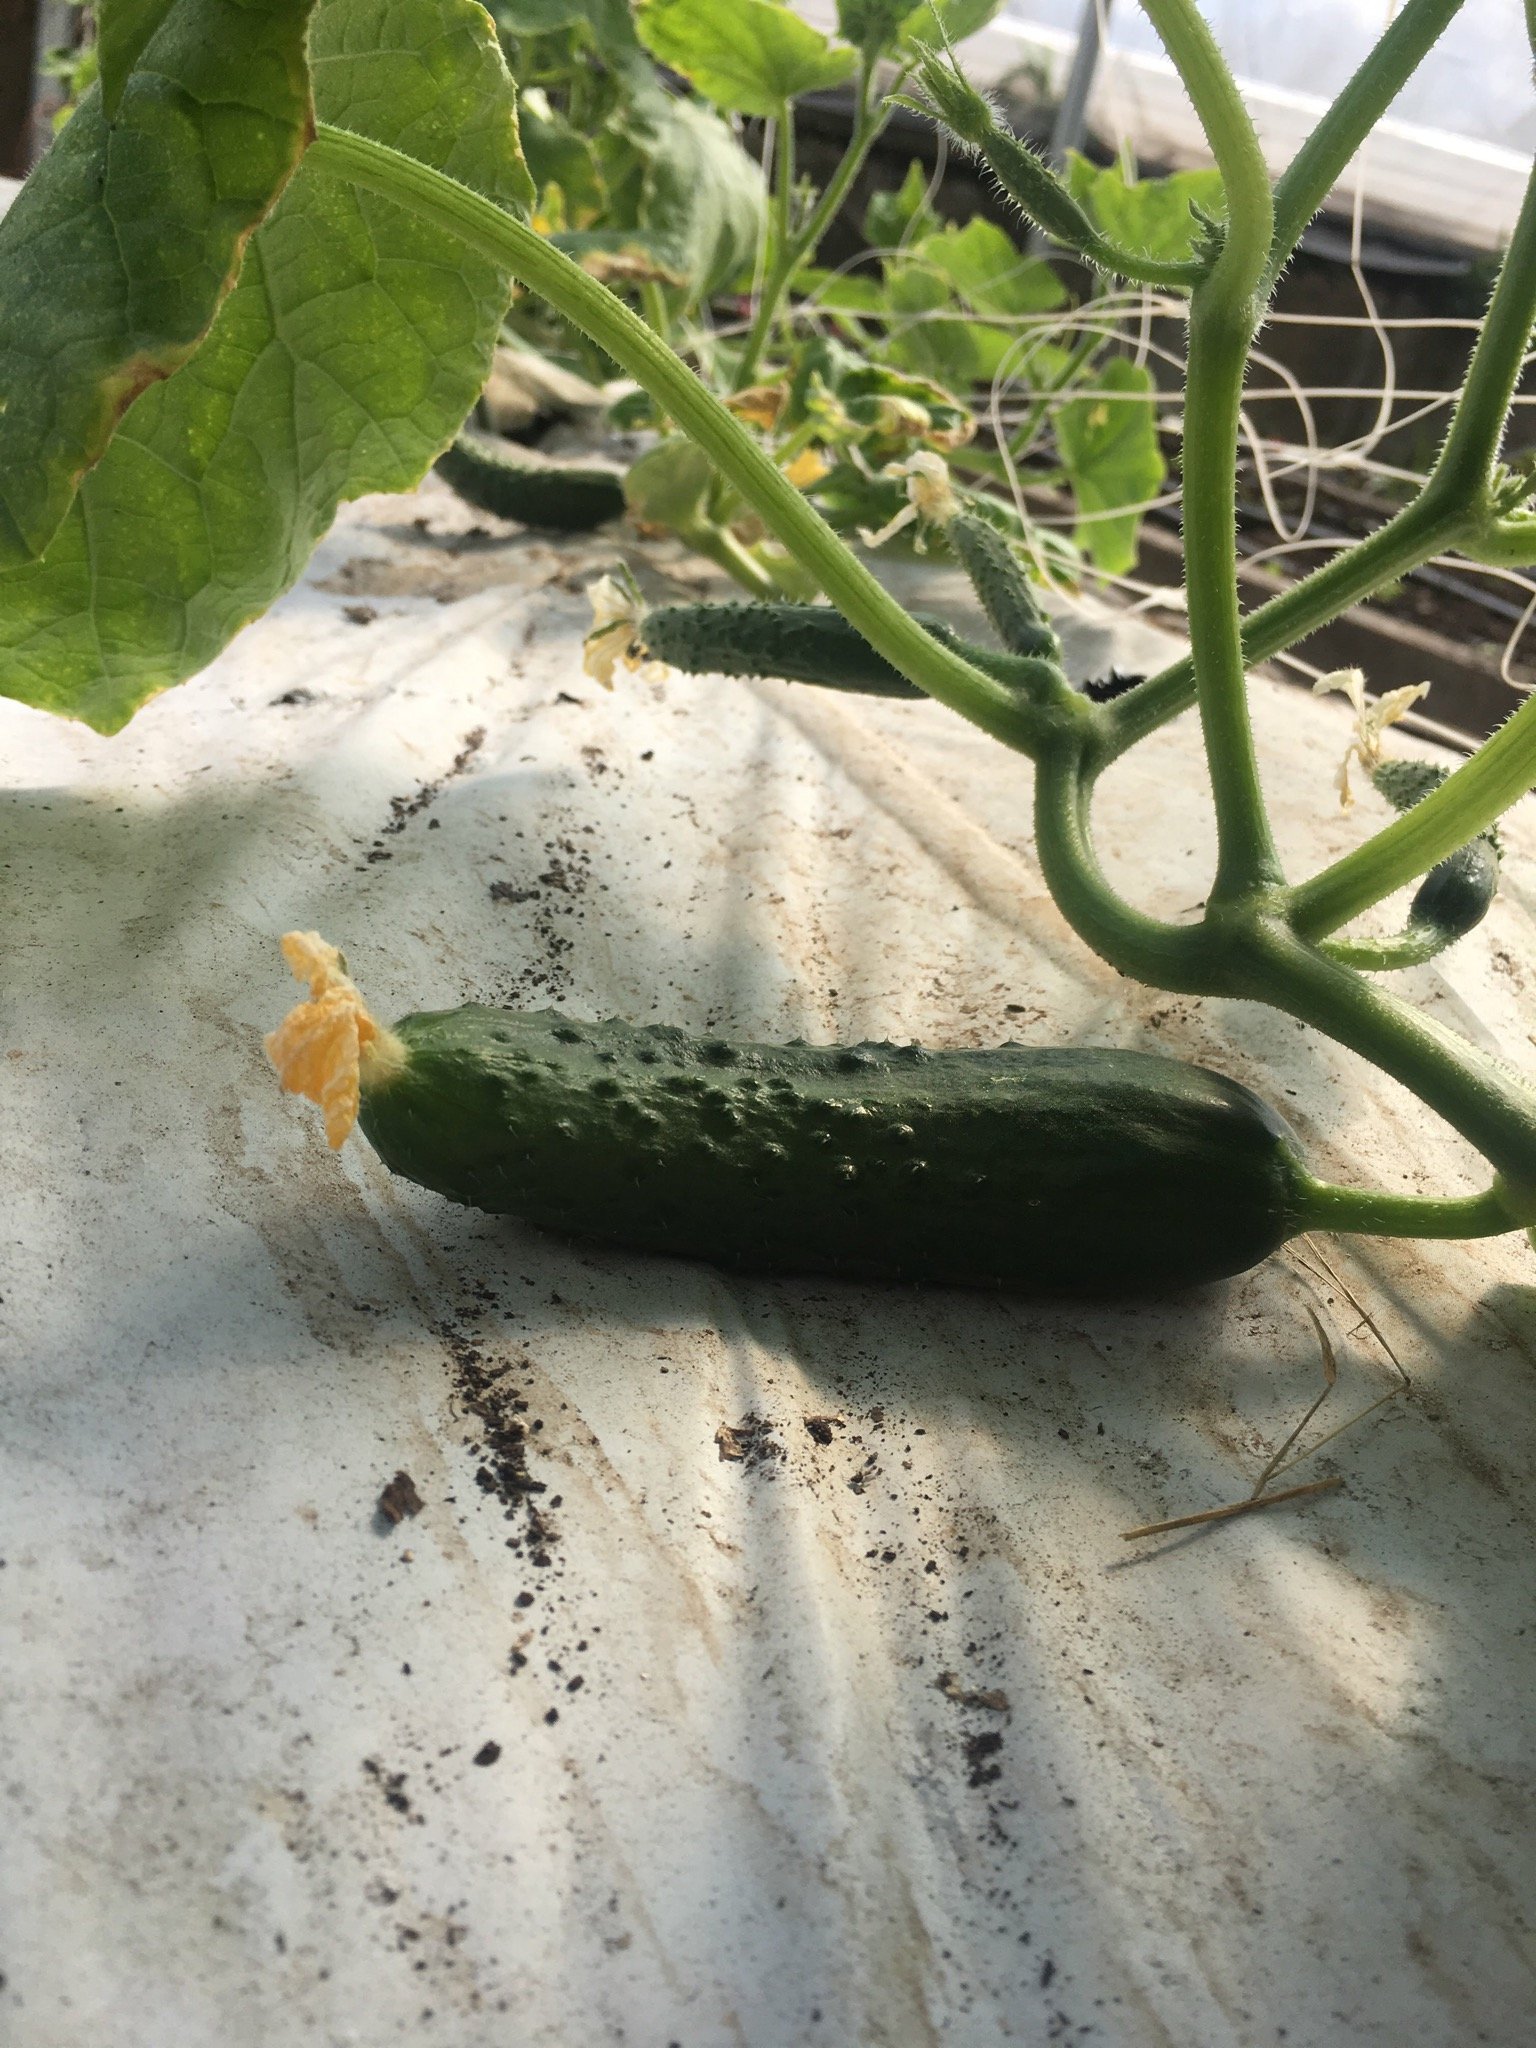 Previous Happening: The Battle For The Cucumbers